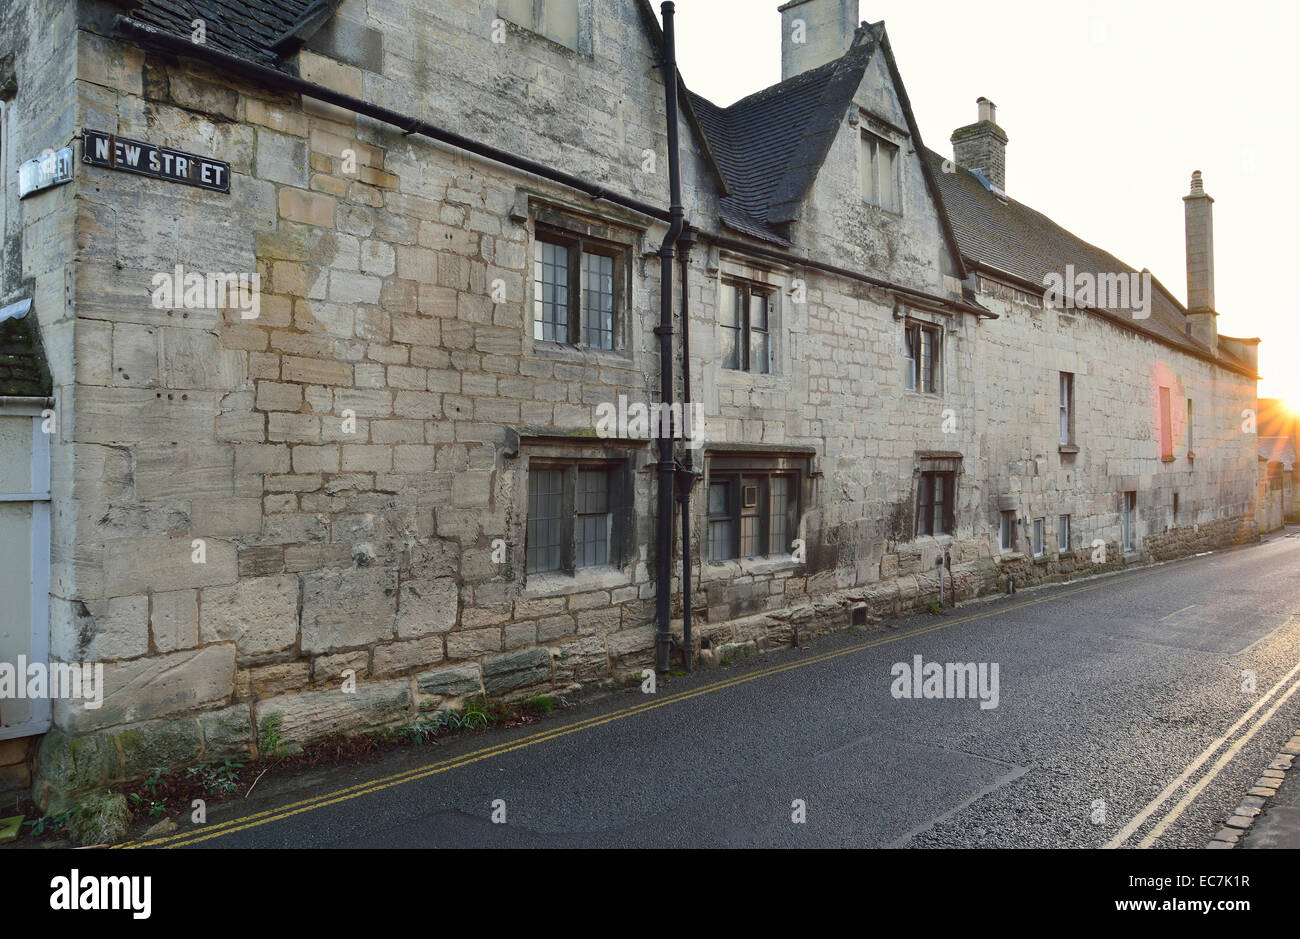 Sunset on New Street, Painswick Old Cotstold Stone Buildings Stock Photo